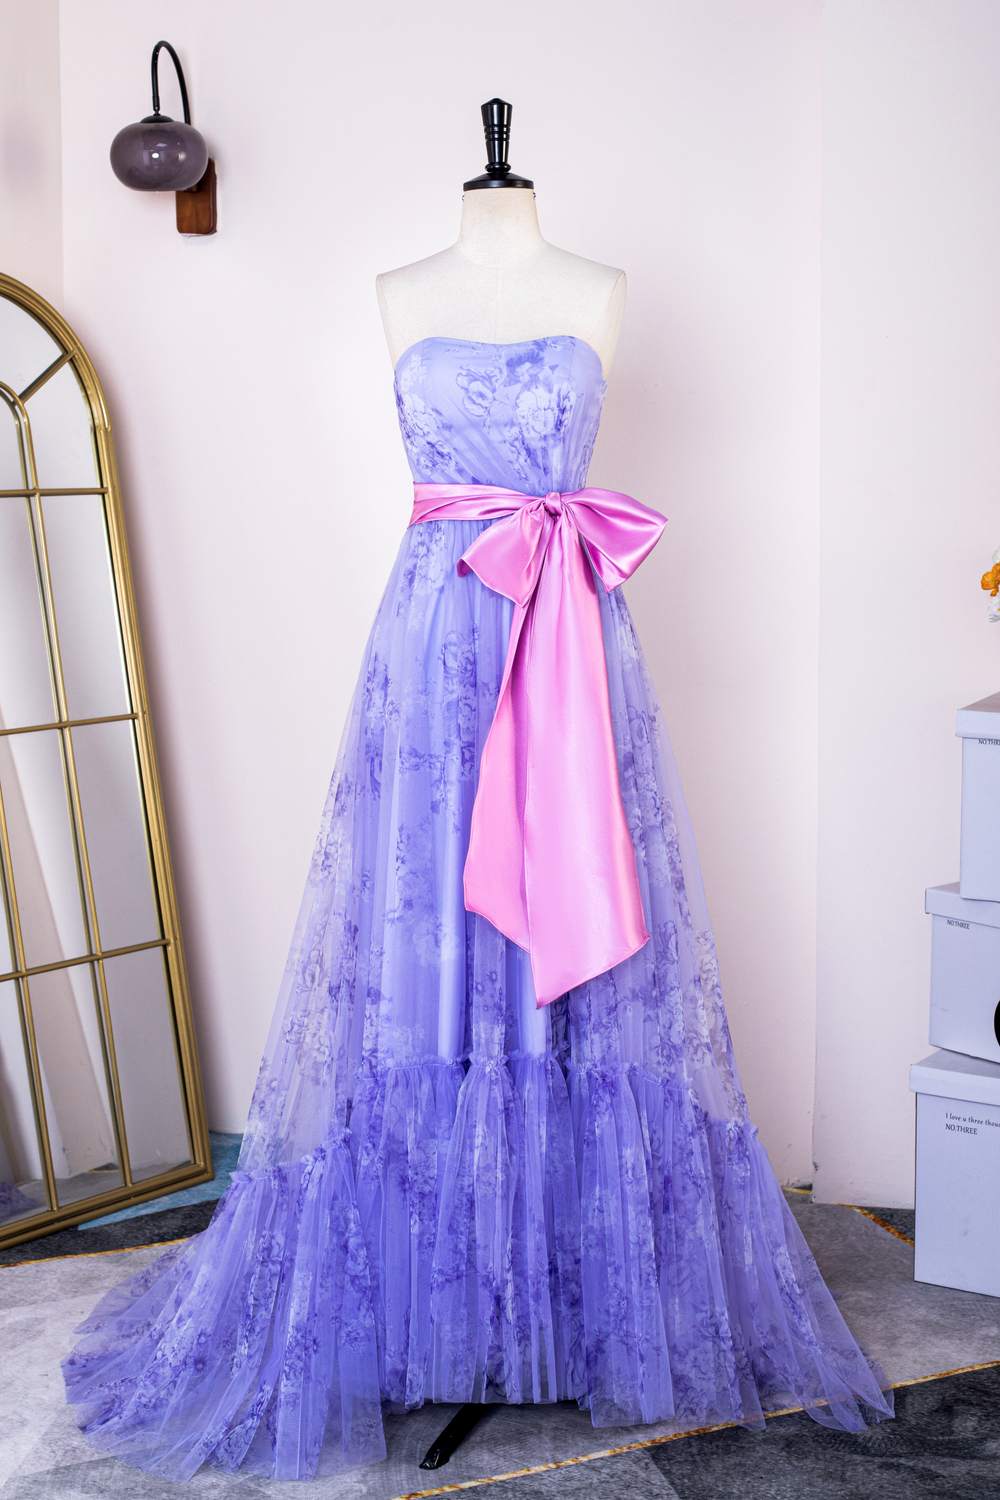 Strapless Lavender Floral Print Long Prom Dress with Bow Sash